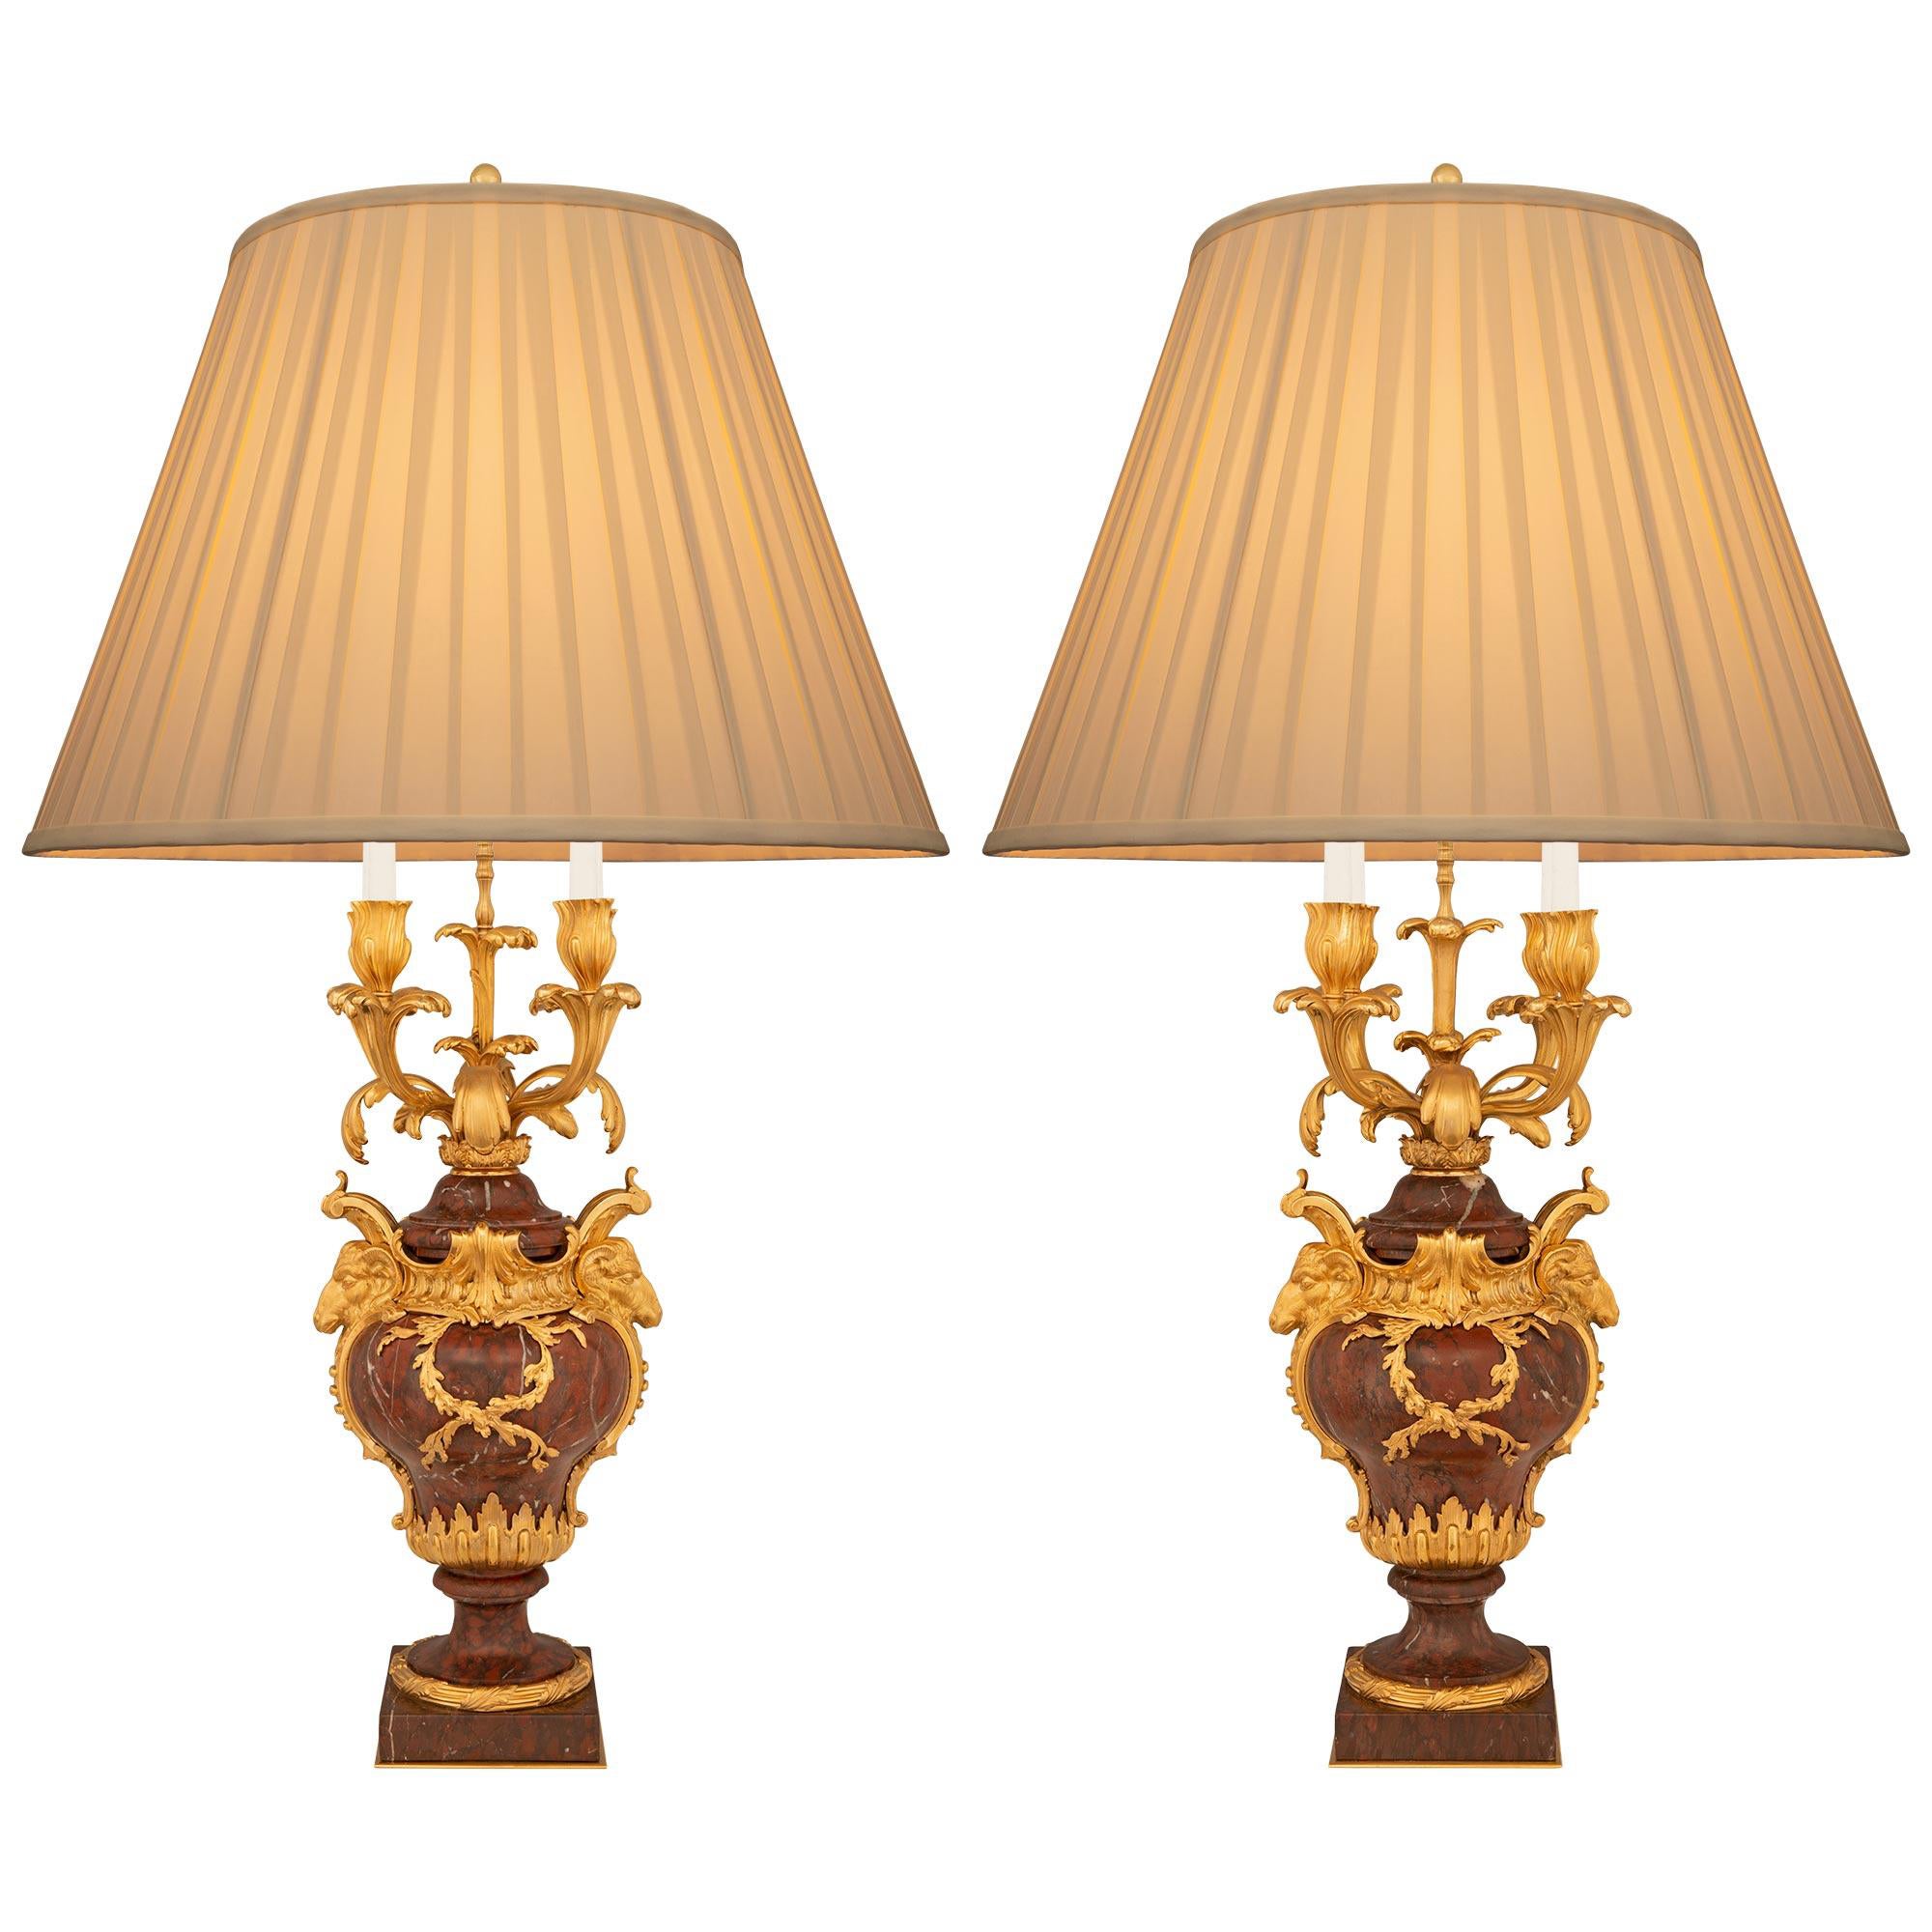 Pair Of French 19th Century Louis XV St. Marble And Ormolu Candelabra Lamps